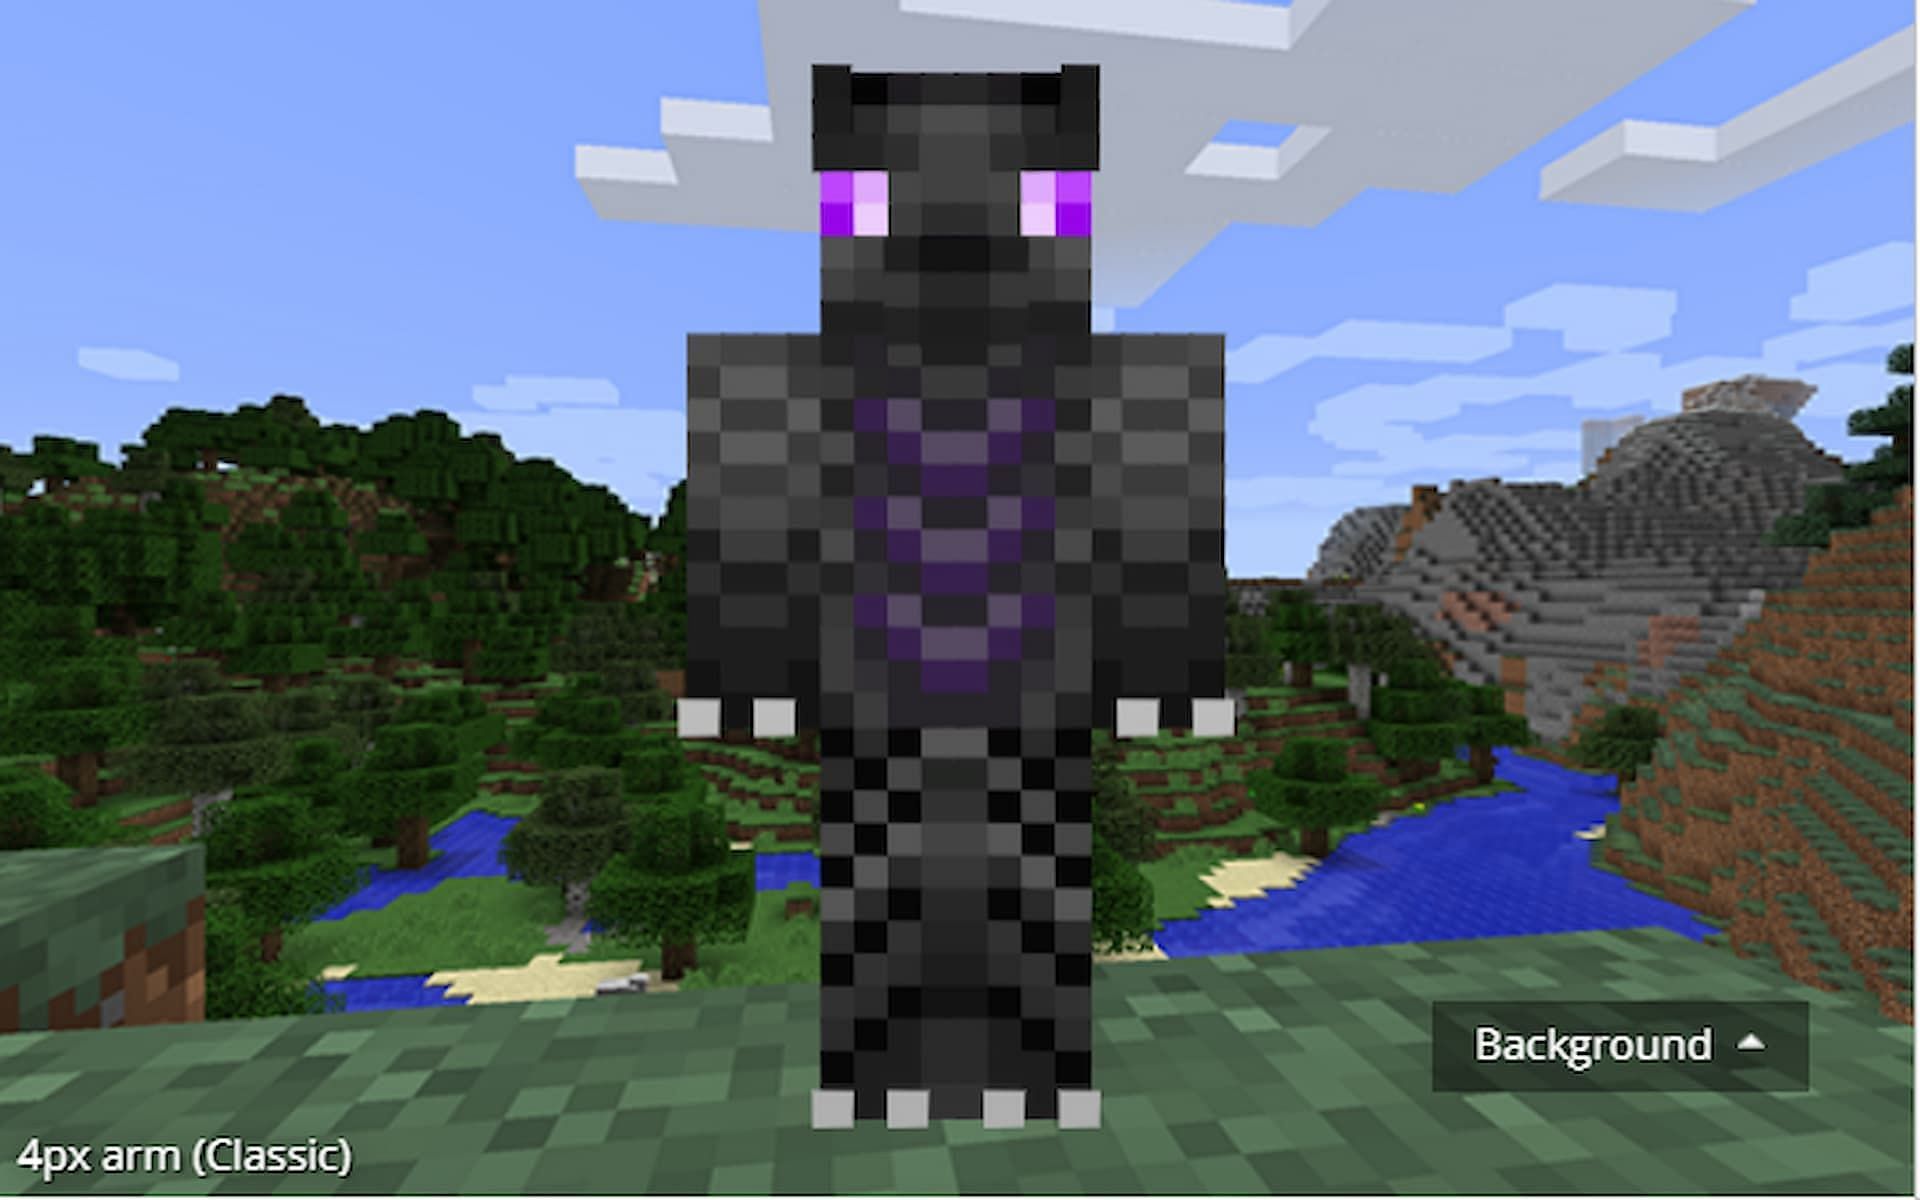 Players can show off their love for the Ender Dragon with this matching skin (Image via Minecraftskins.com)